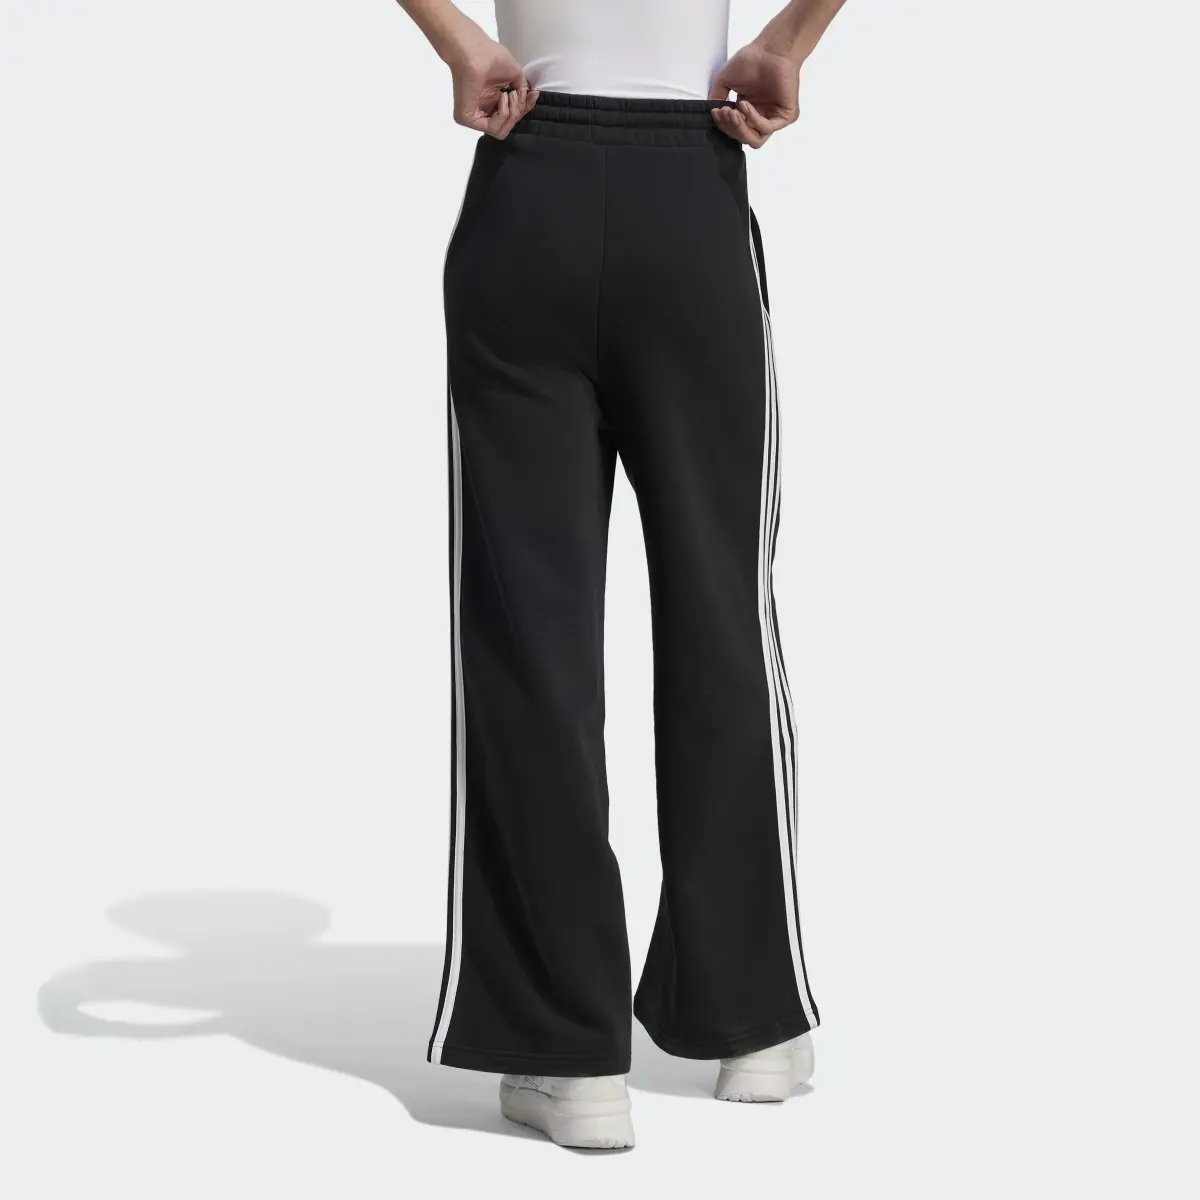 Adidas Essentials 3-Stripes French Terry Wide Pants. 2